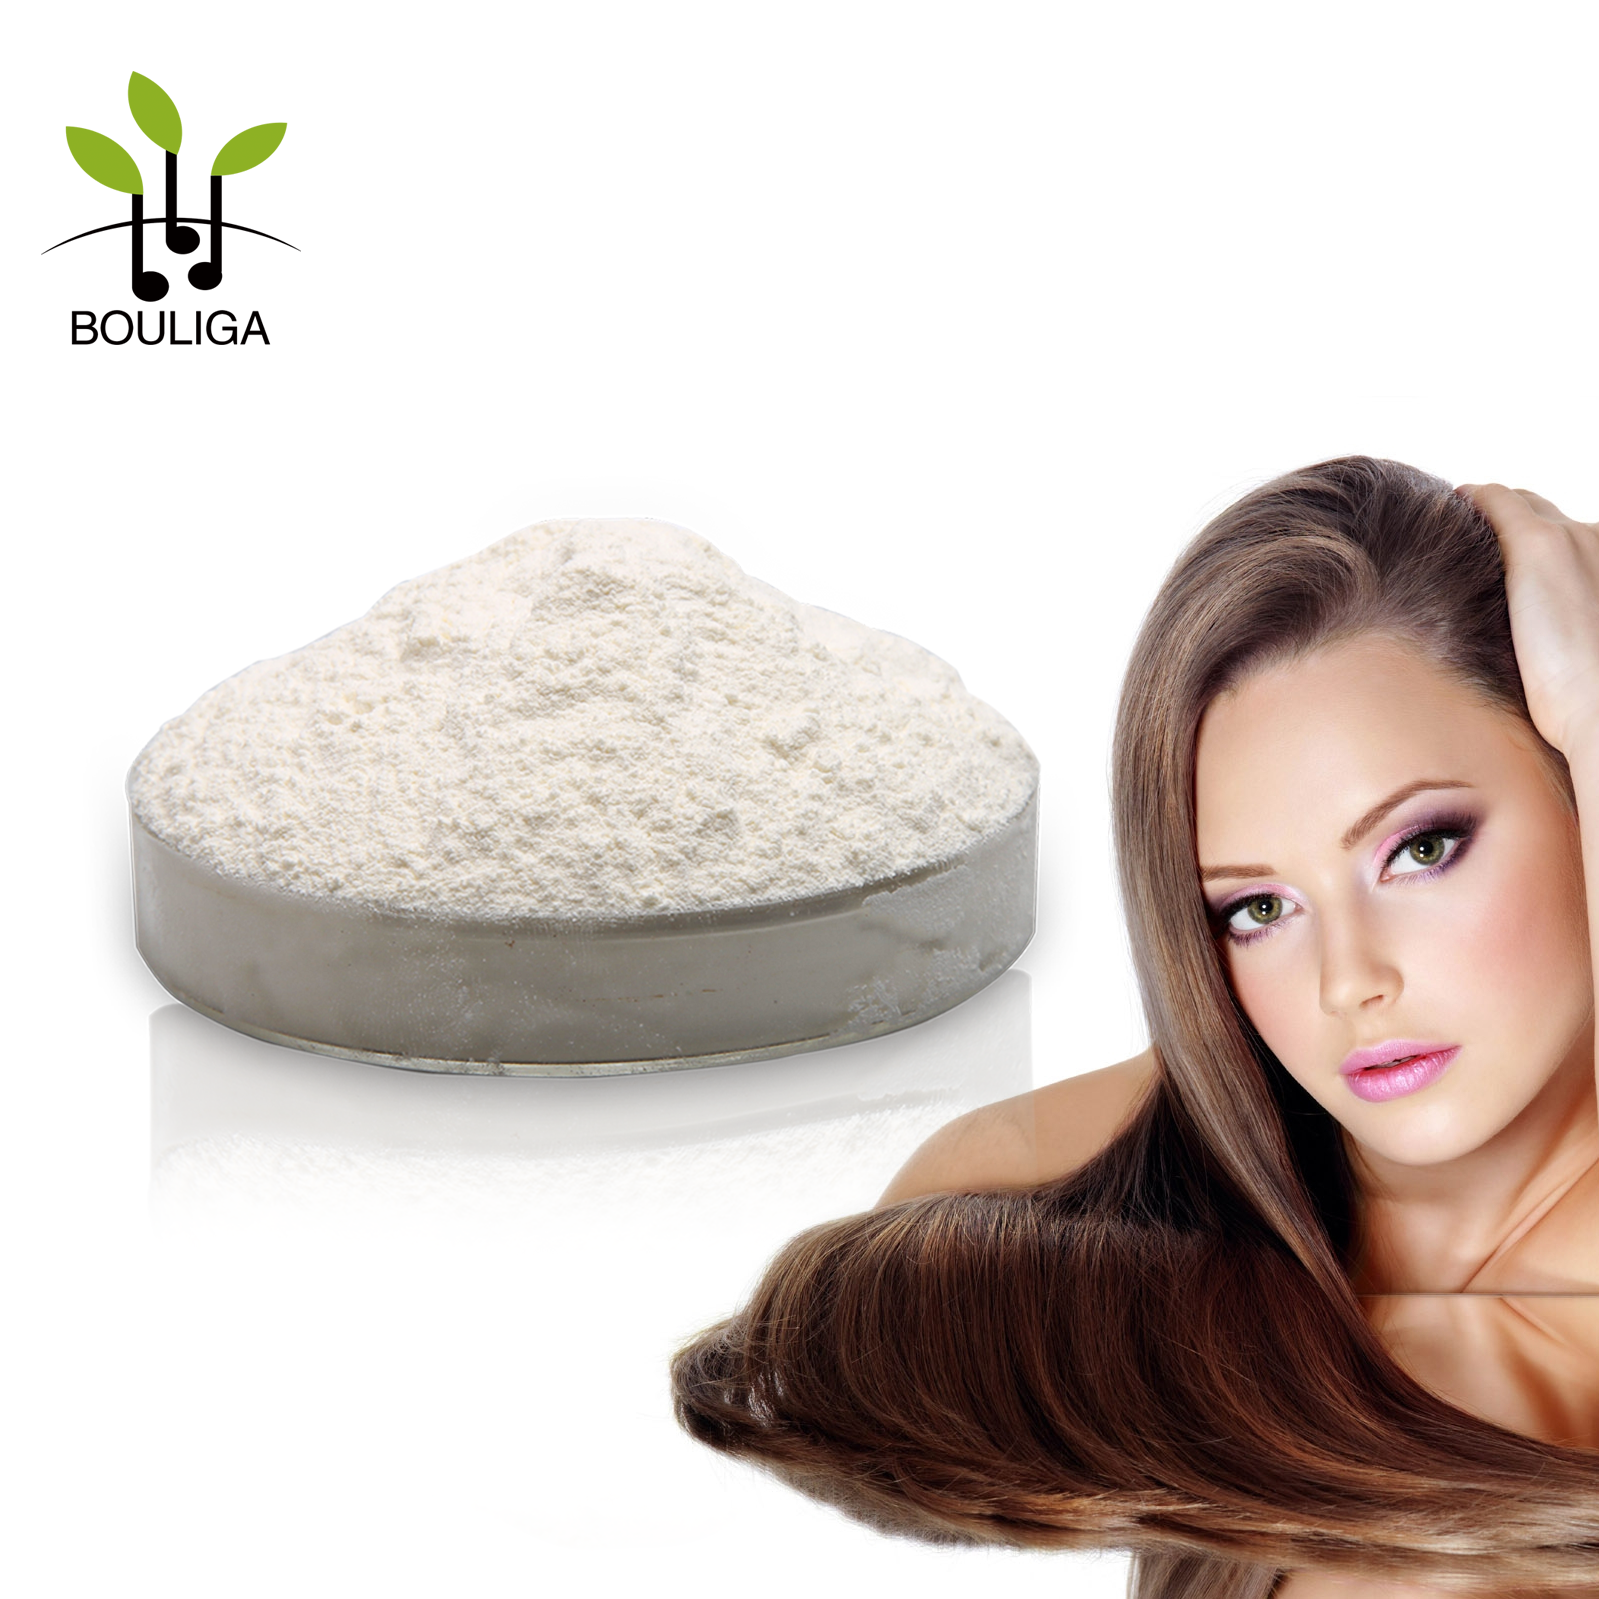 Shandong Bouliga Cationic Sodium Hyaluronate Powder ues for hair and scalp care: